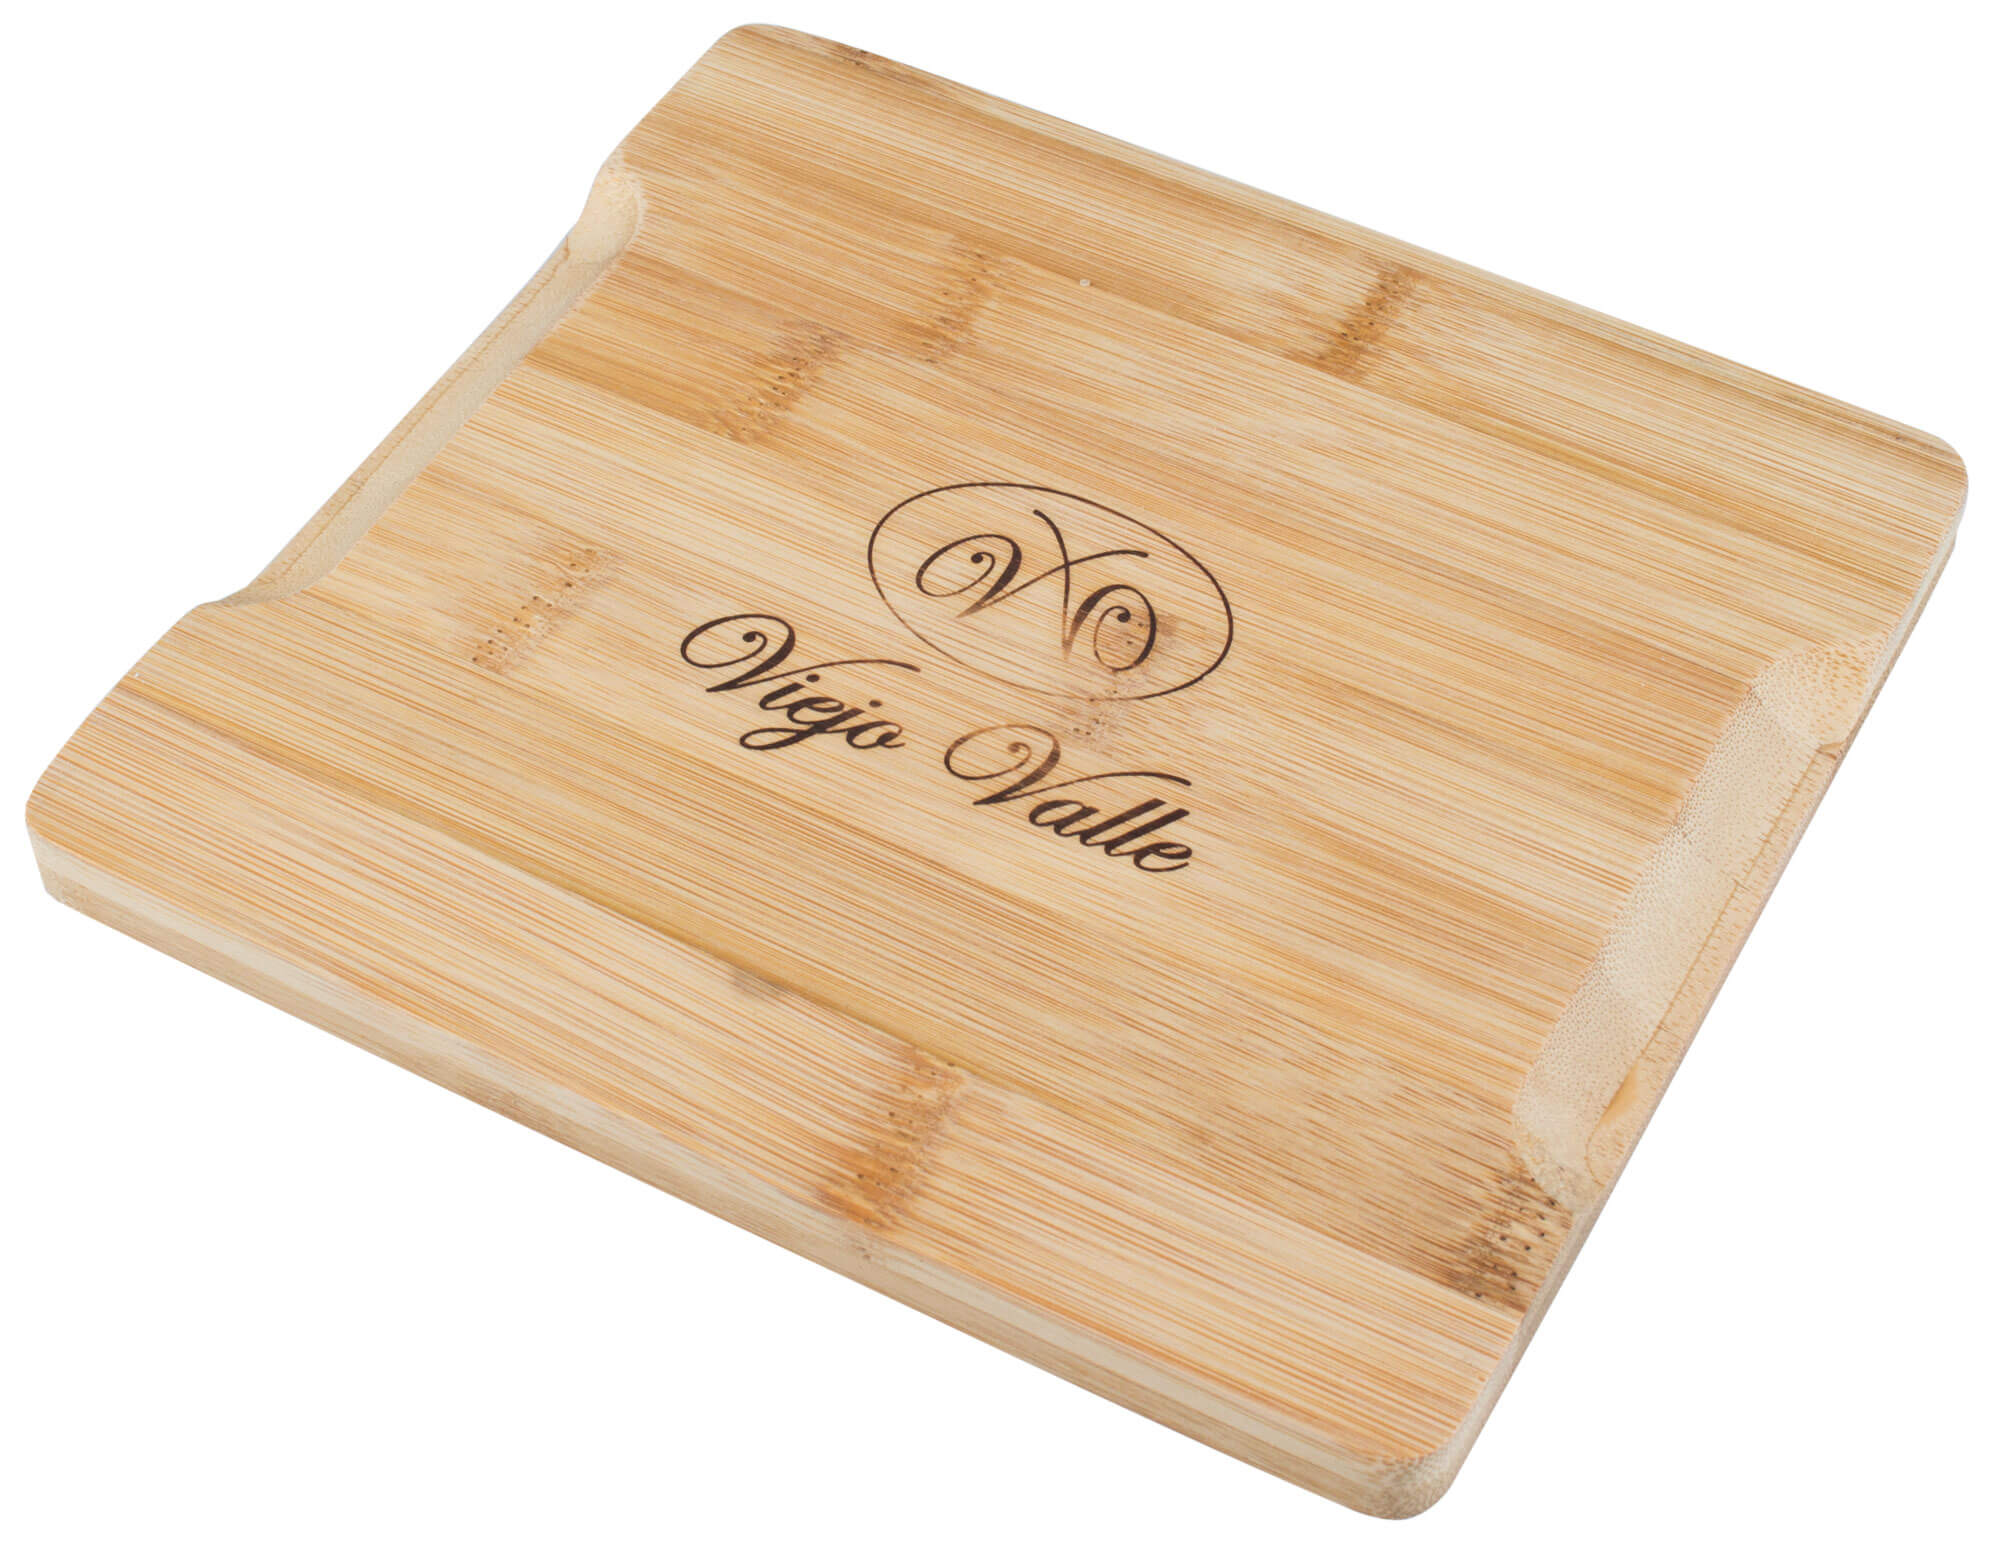 Serving tray bamboo - 17,5x16cm